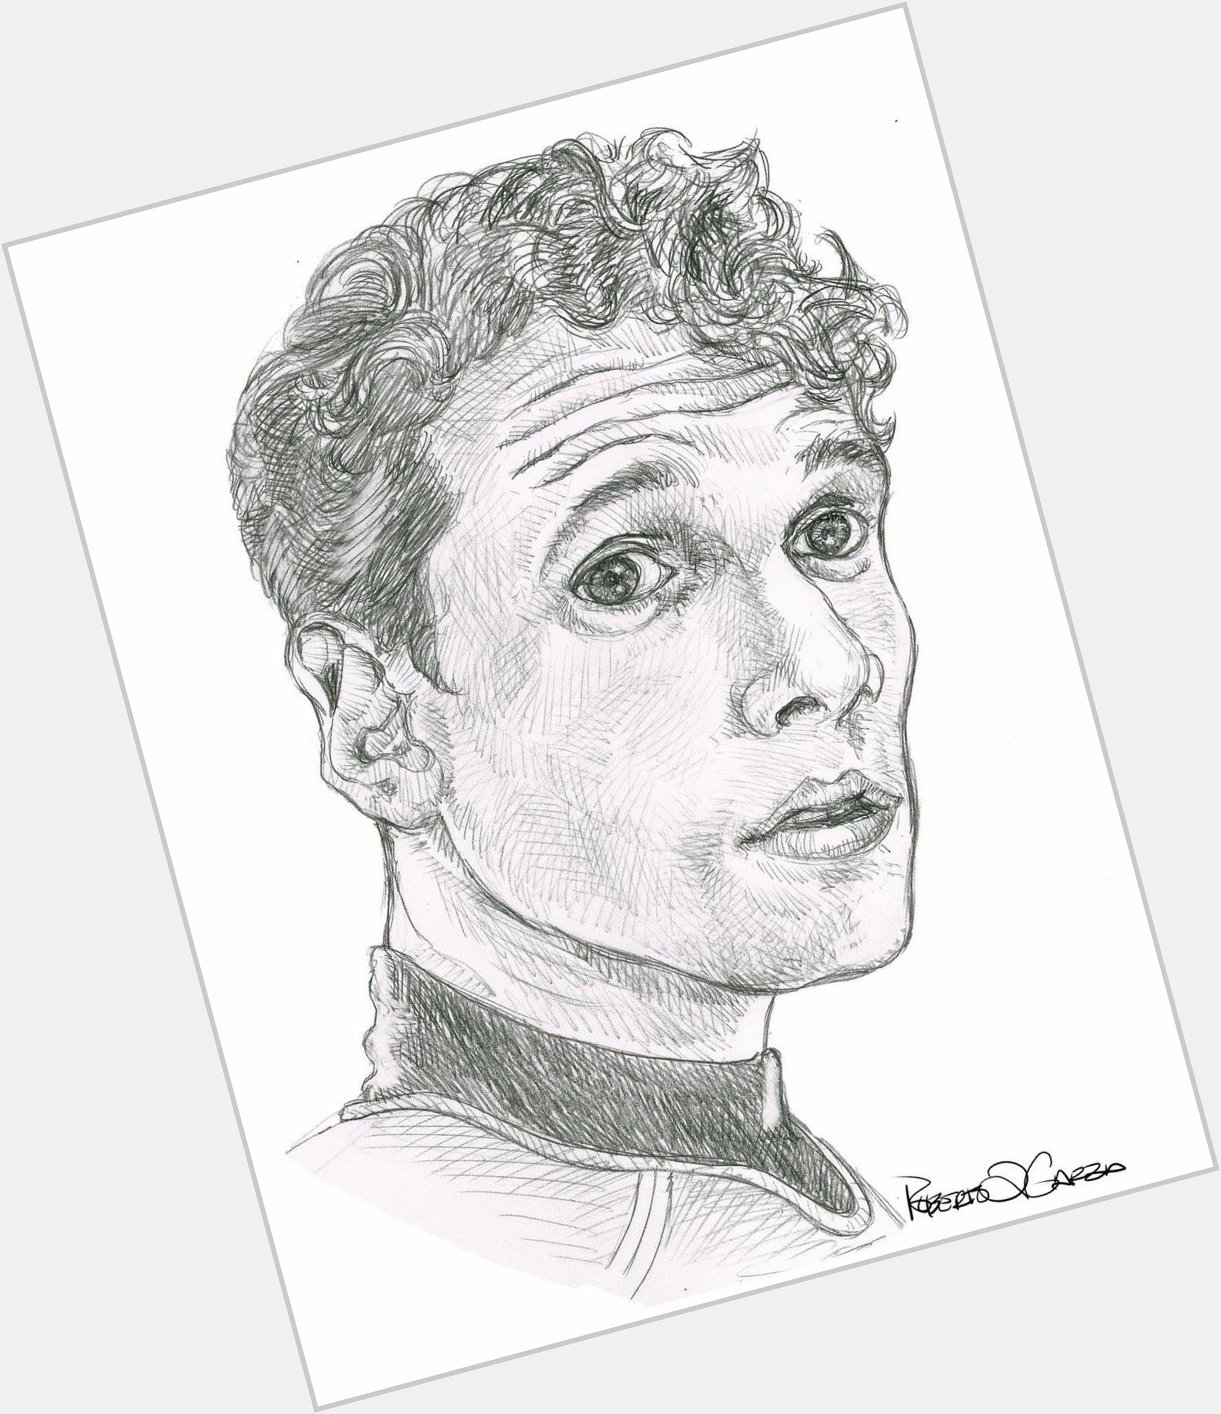  Happy Birthday Anton Yelchin
March 11, 1989 - June 19, 2016
You are missed. RIP (the author is stated) 